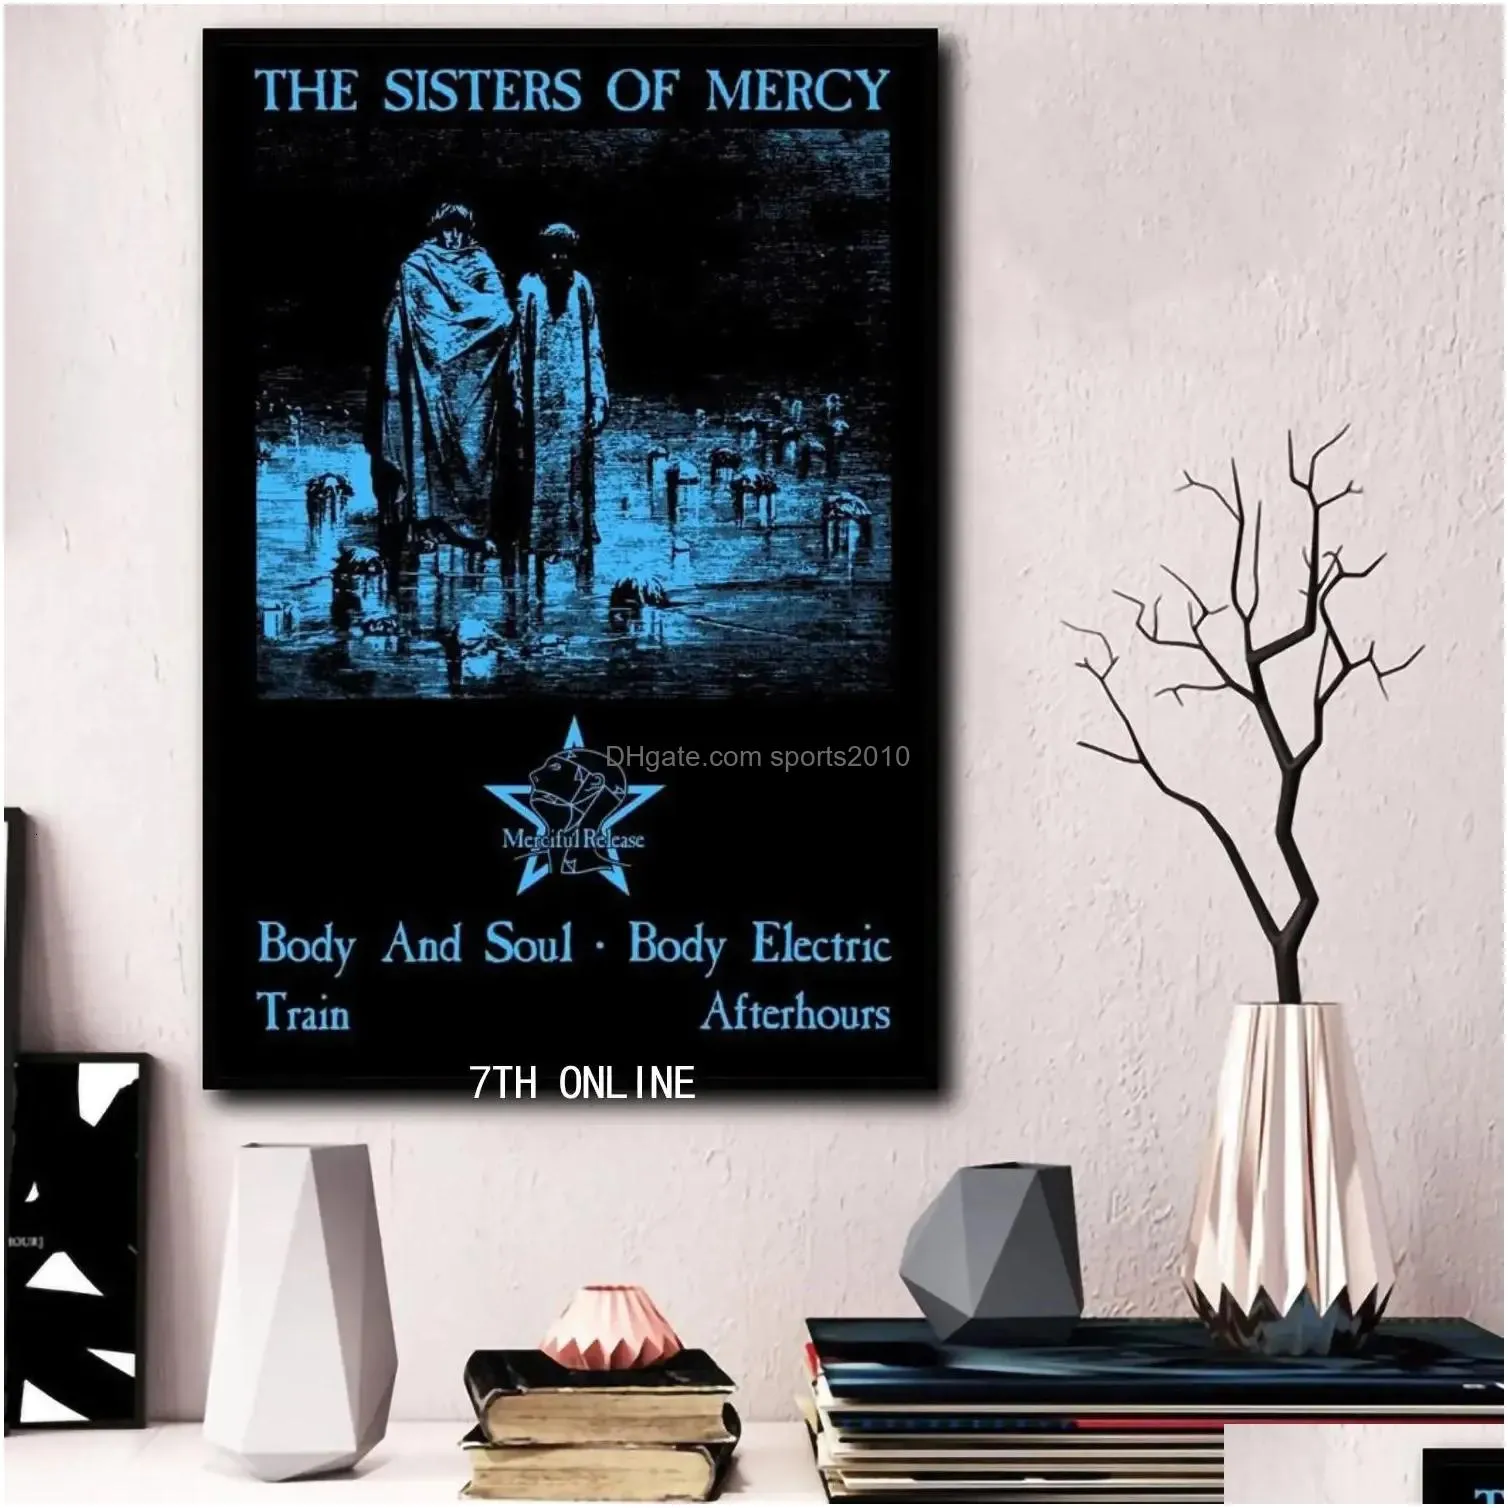 the sisters of mercy poster painting 24x36 wall art canvas posters personalized gift modern family bedroom decoration art poster